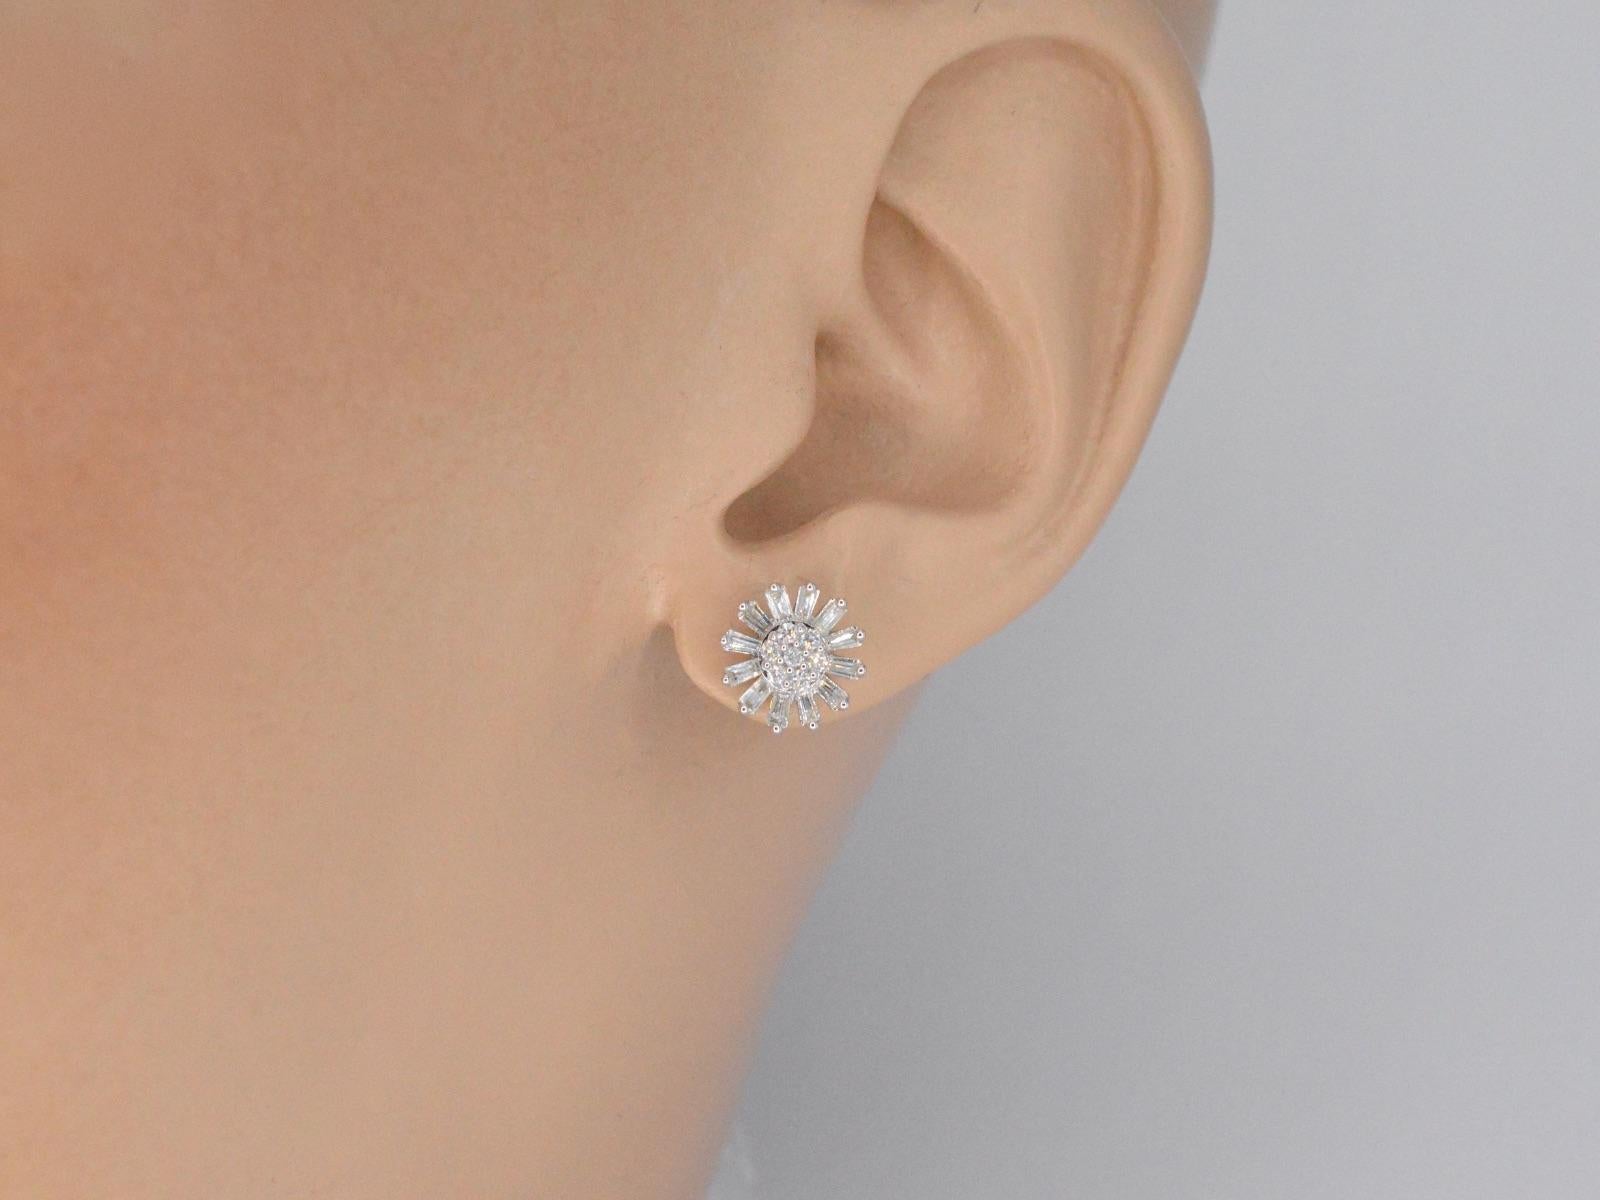 These white gold earrings feature a stunning flower design, adorned with 0.50 carats of natural genuine diamonds. The diamonds are expertly set in the white gold to create a seamless and elegant look that is perfect for any special occasion. The